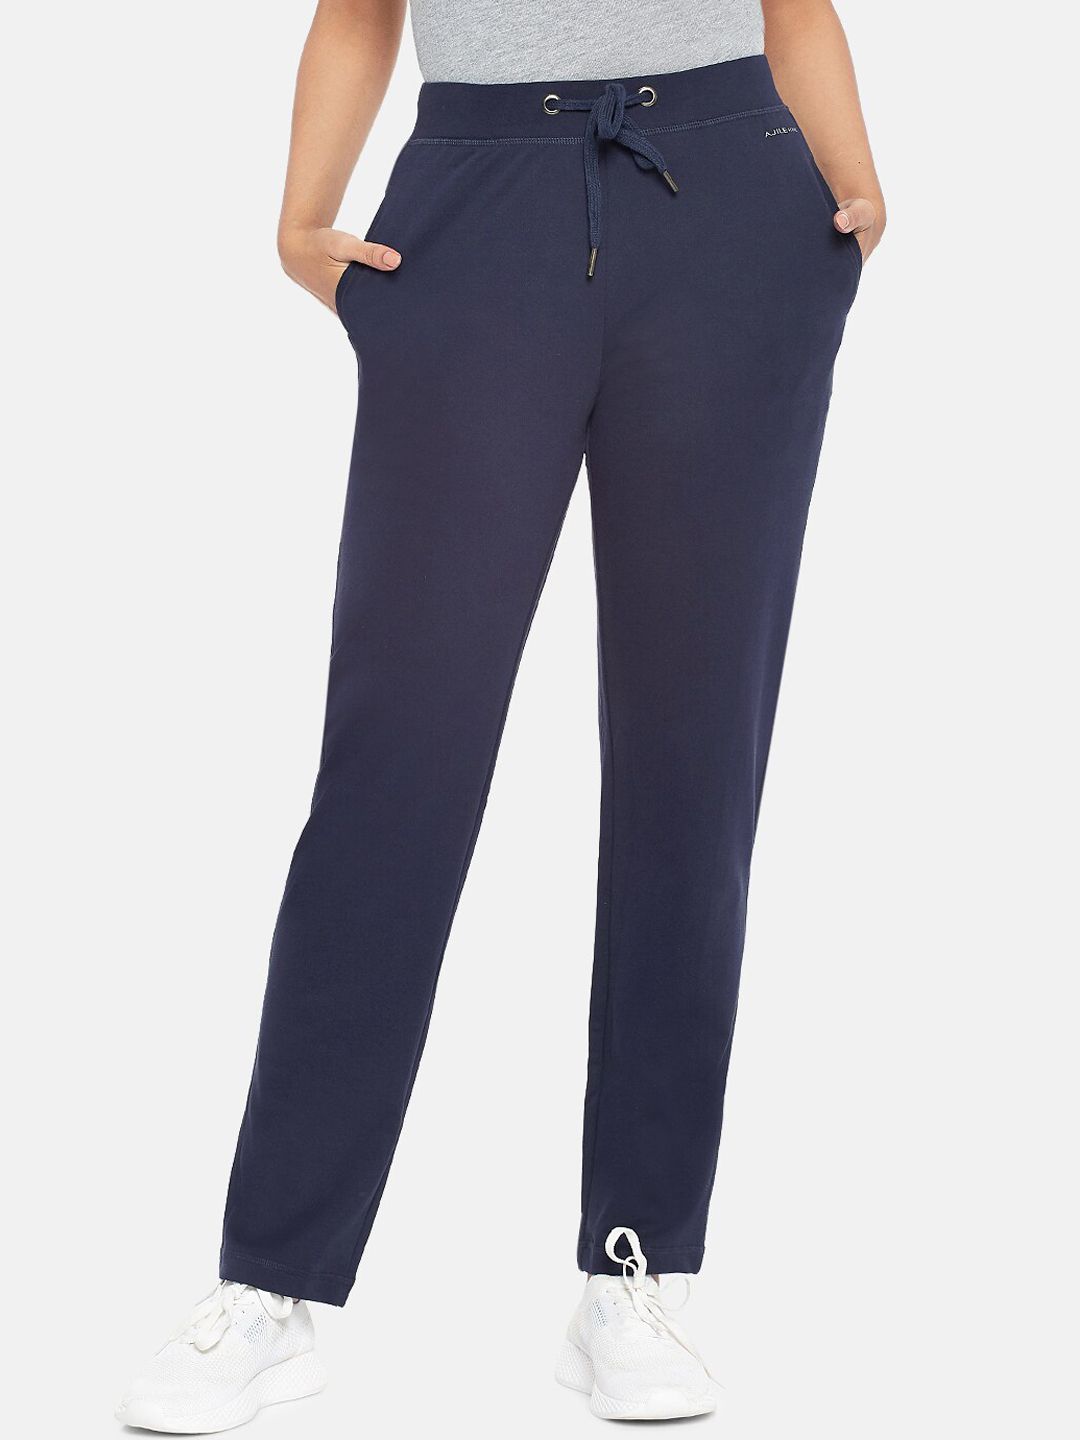 Ajile by Pantaloons Women Navy Blue Solid Pure Cotton Track Pants Price in India